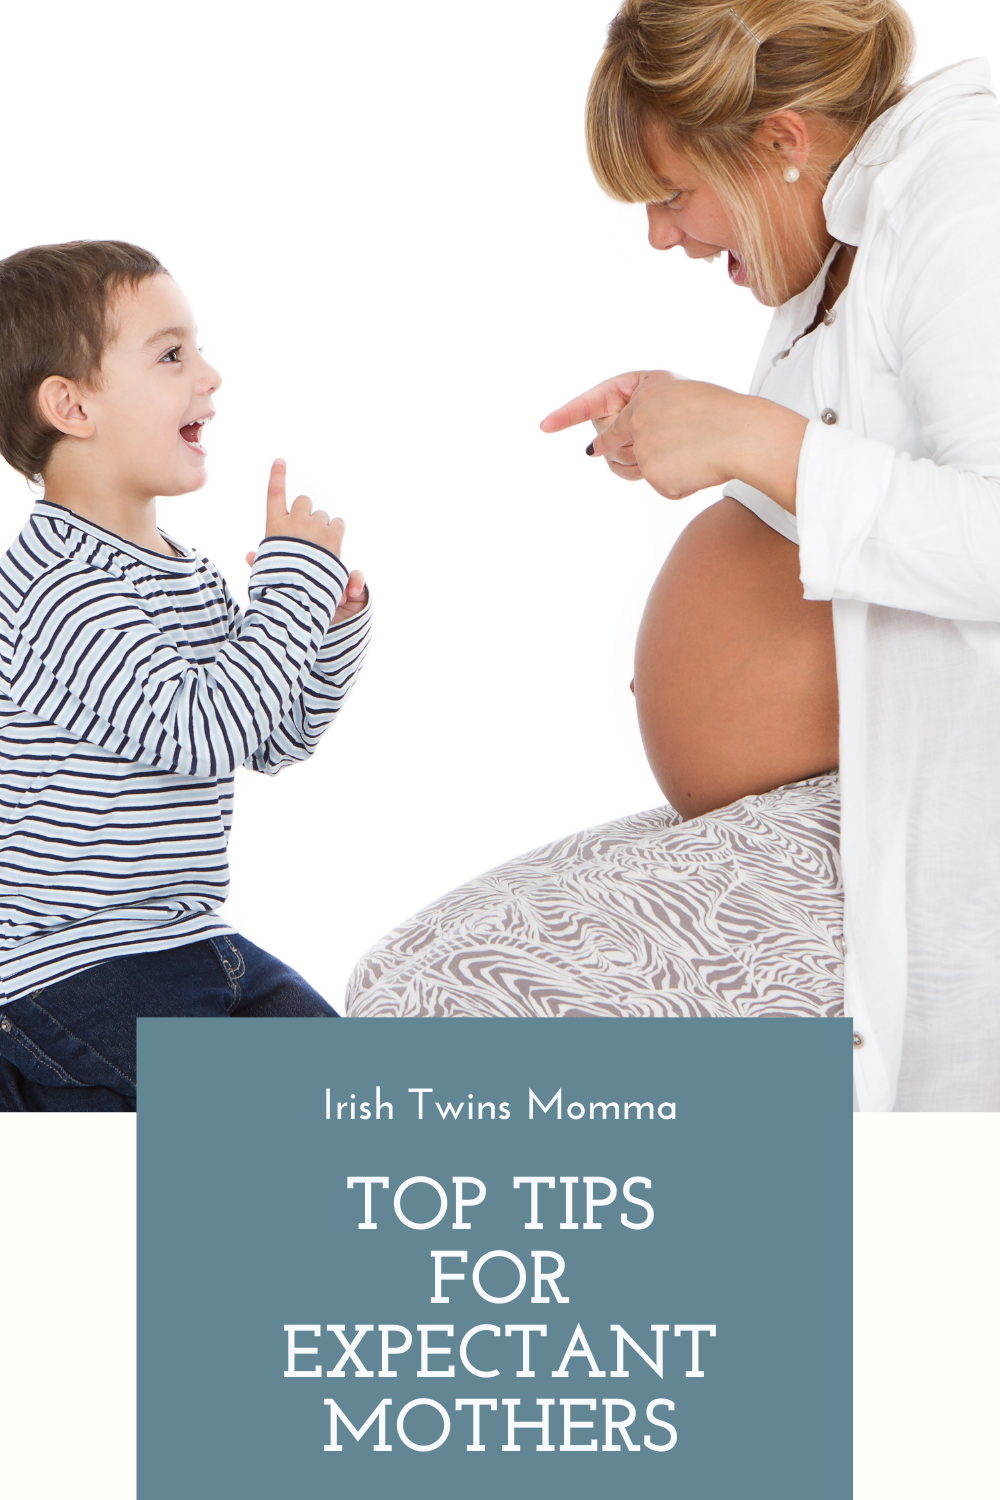 Top Tips for Expecting Mothers